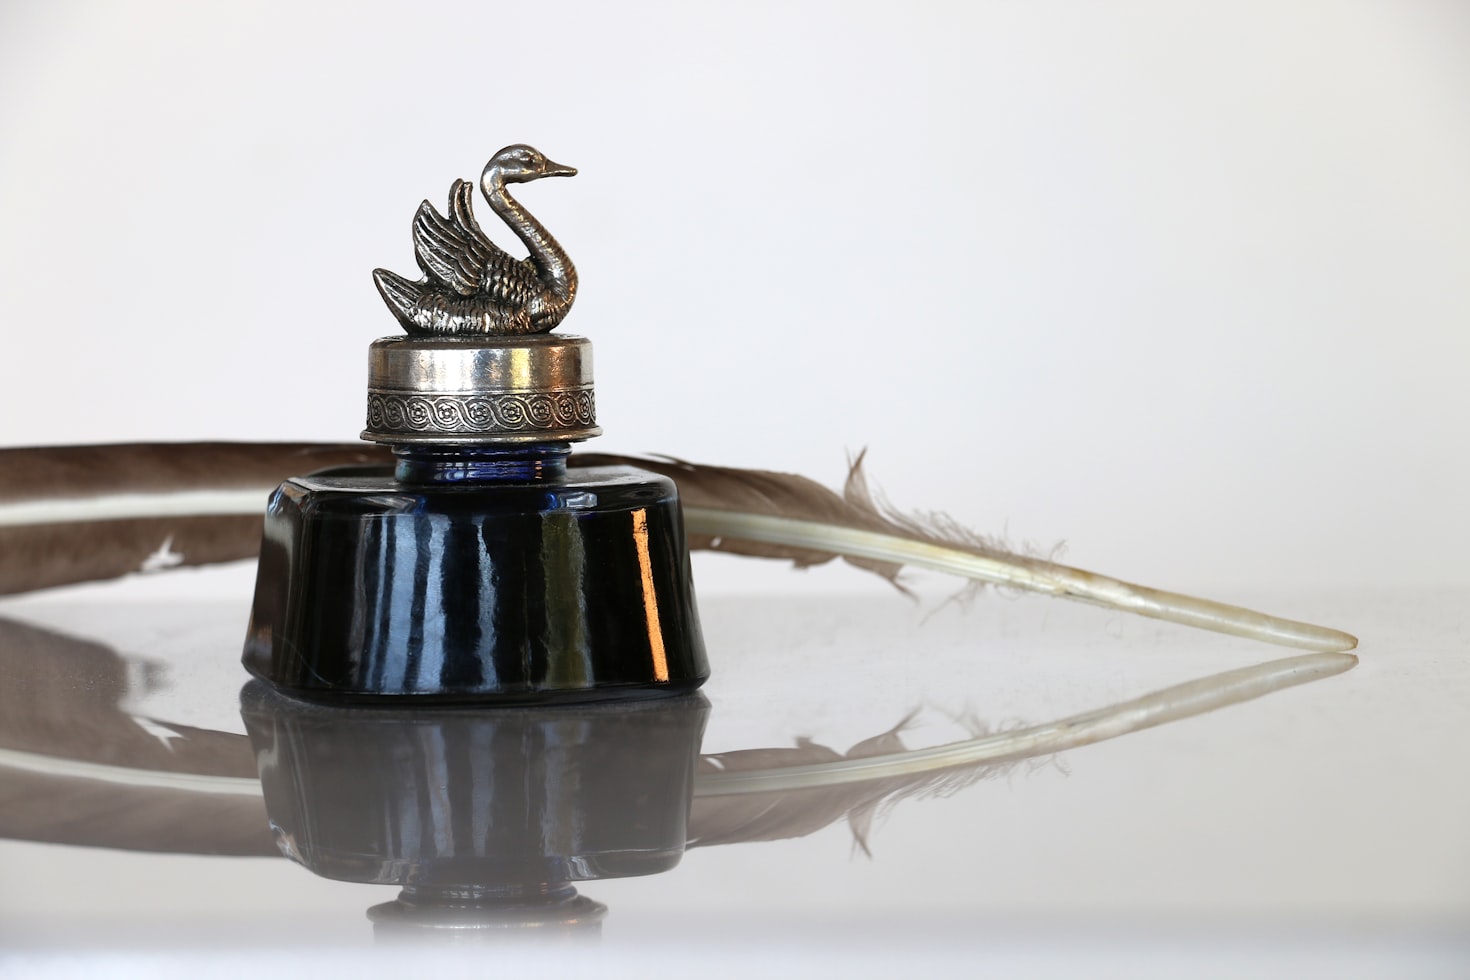 Image shows a quill with an inkwell